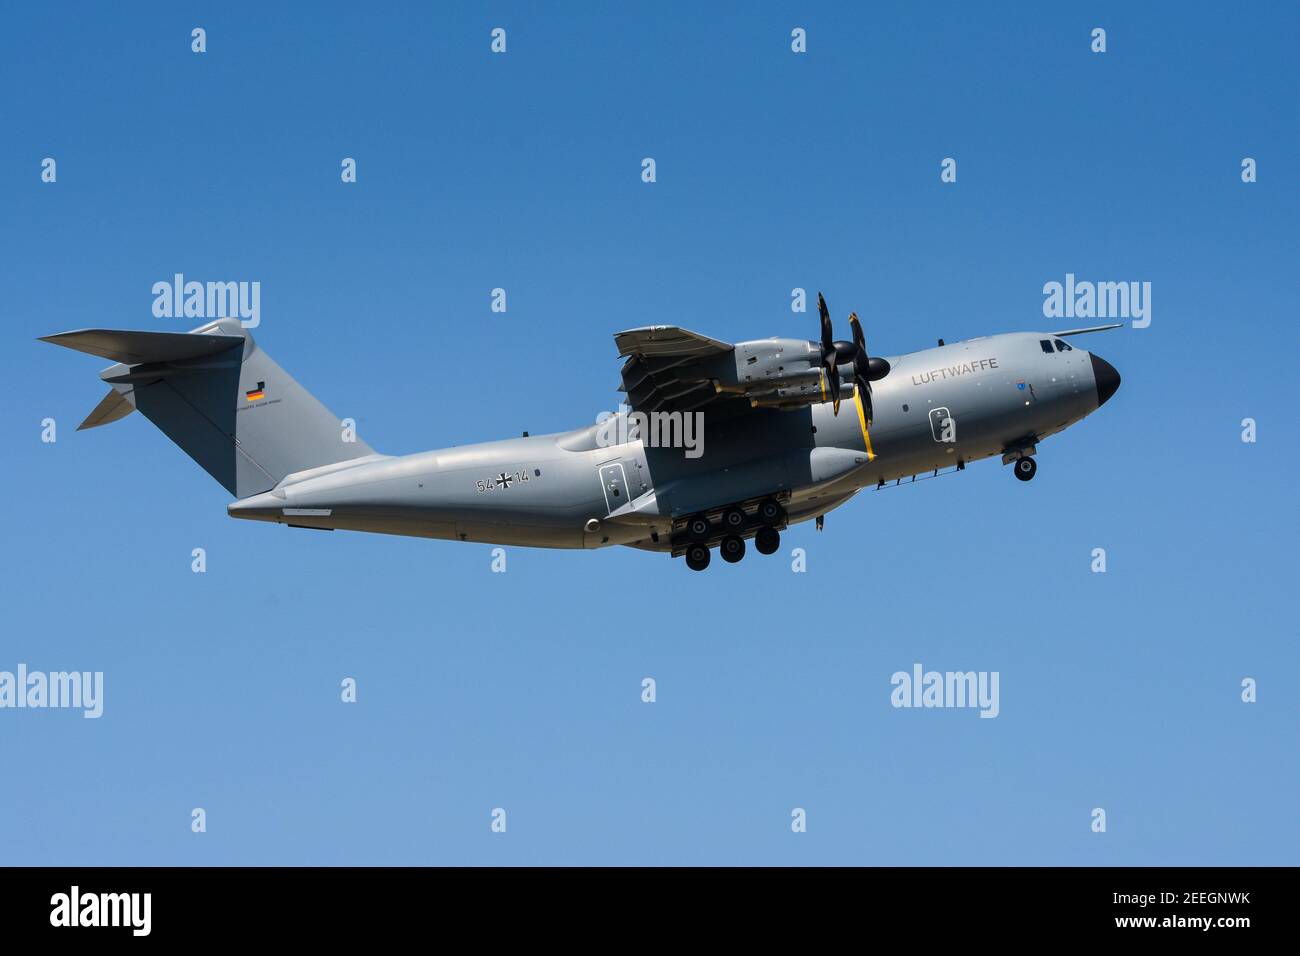 07.06.2018, Wunstdorf, Lower Saxony, an Airbus A400M 'Atlas' in flight, taken on spotterday on Air Transport Wing 62. The Airbus A400M has been replacing transport aircraft from seven NATO countries since 2013. In the German Air Force, the A400M is to replace the old Transall C-160 from the 1960s. With a higher payload, range and speed, the A400M should have the same capabilities and also be able to be used as a tanker aircraft. The first A400M was delivered to Germany at the end of 2014, the last of 53 pieces is to take place in 2026. | usage worldwide Stock Photo